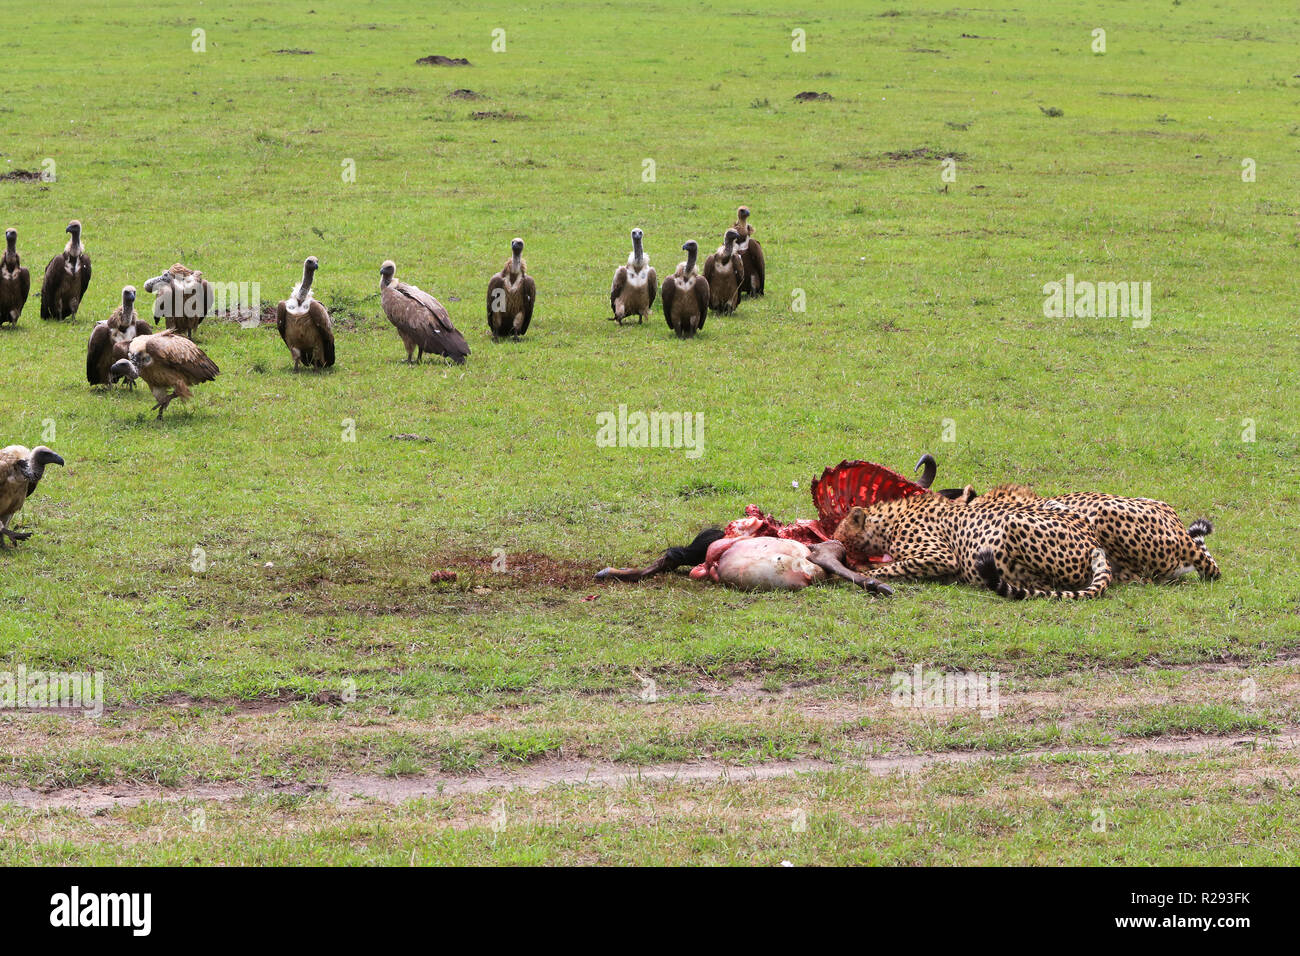 Five cheetahs are feeding off a wildebeest they killed in the grasslands in Masai Mara Game Park, Narok County, Kenya. Vultures are gathering nearby. Stock Photo